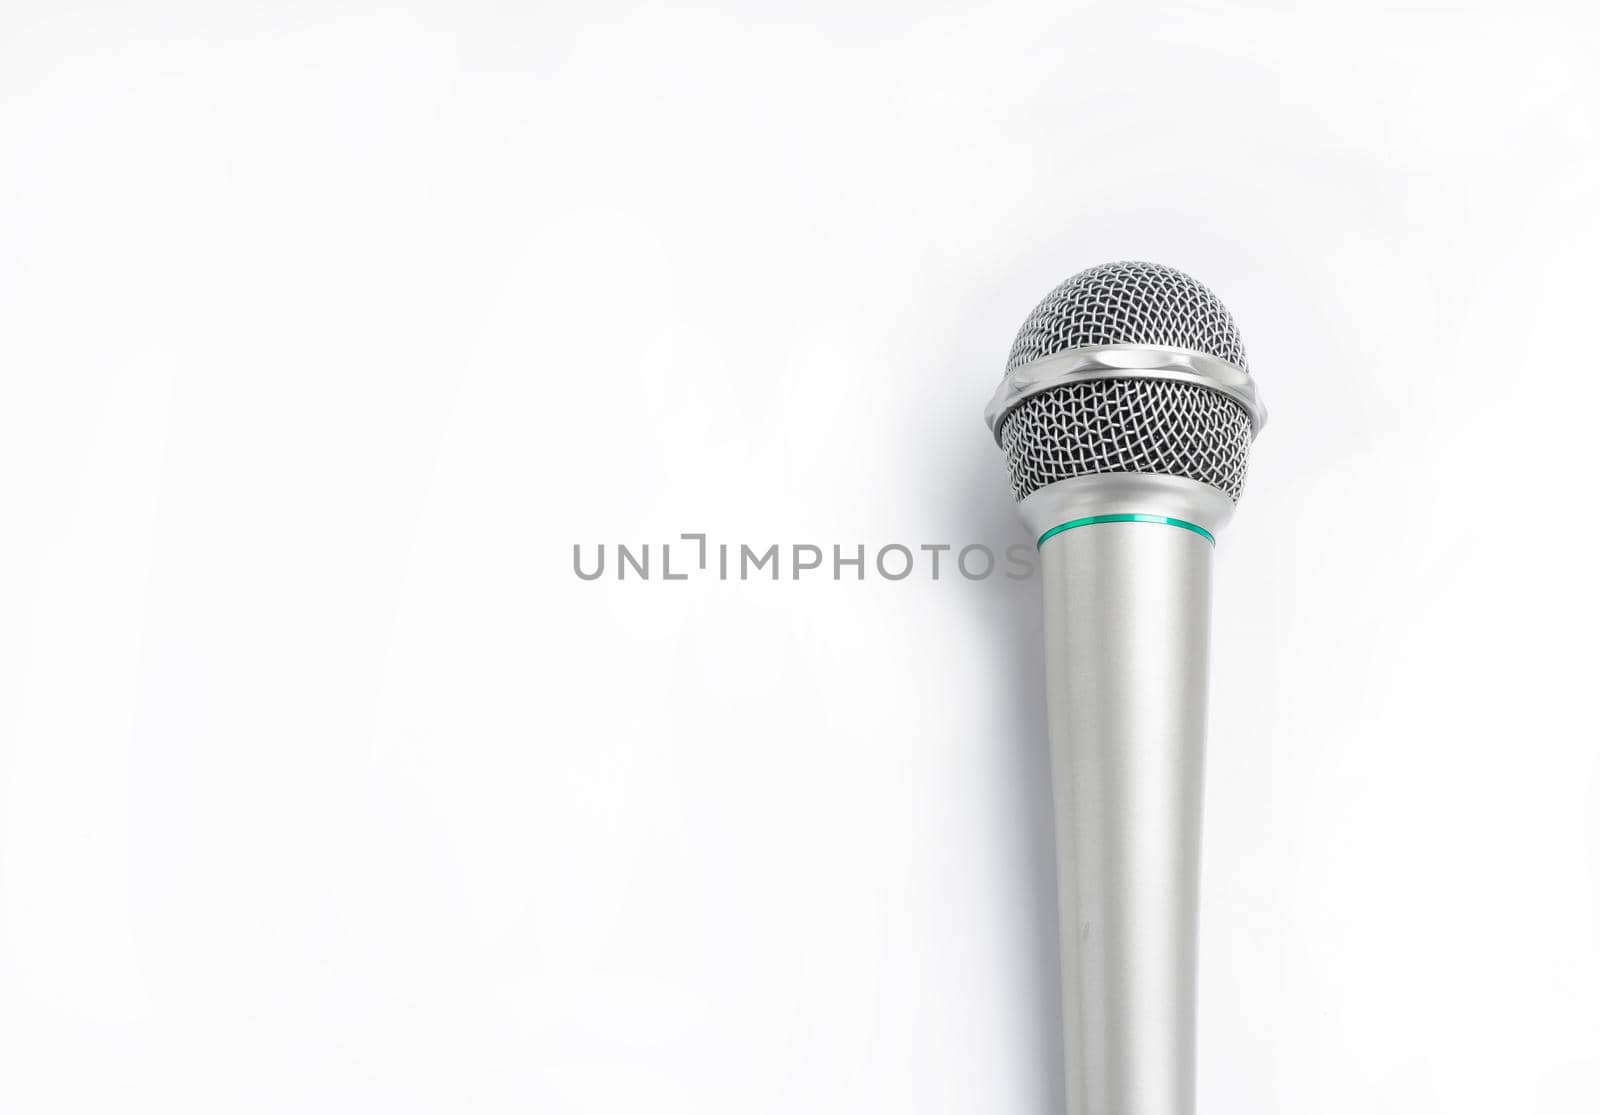 Silver microphone on white background.